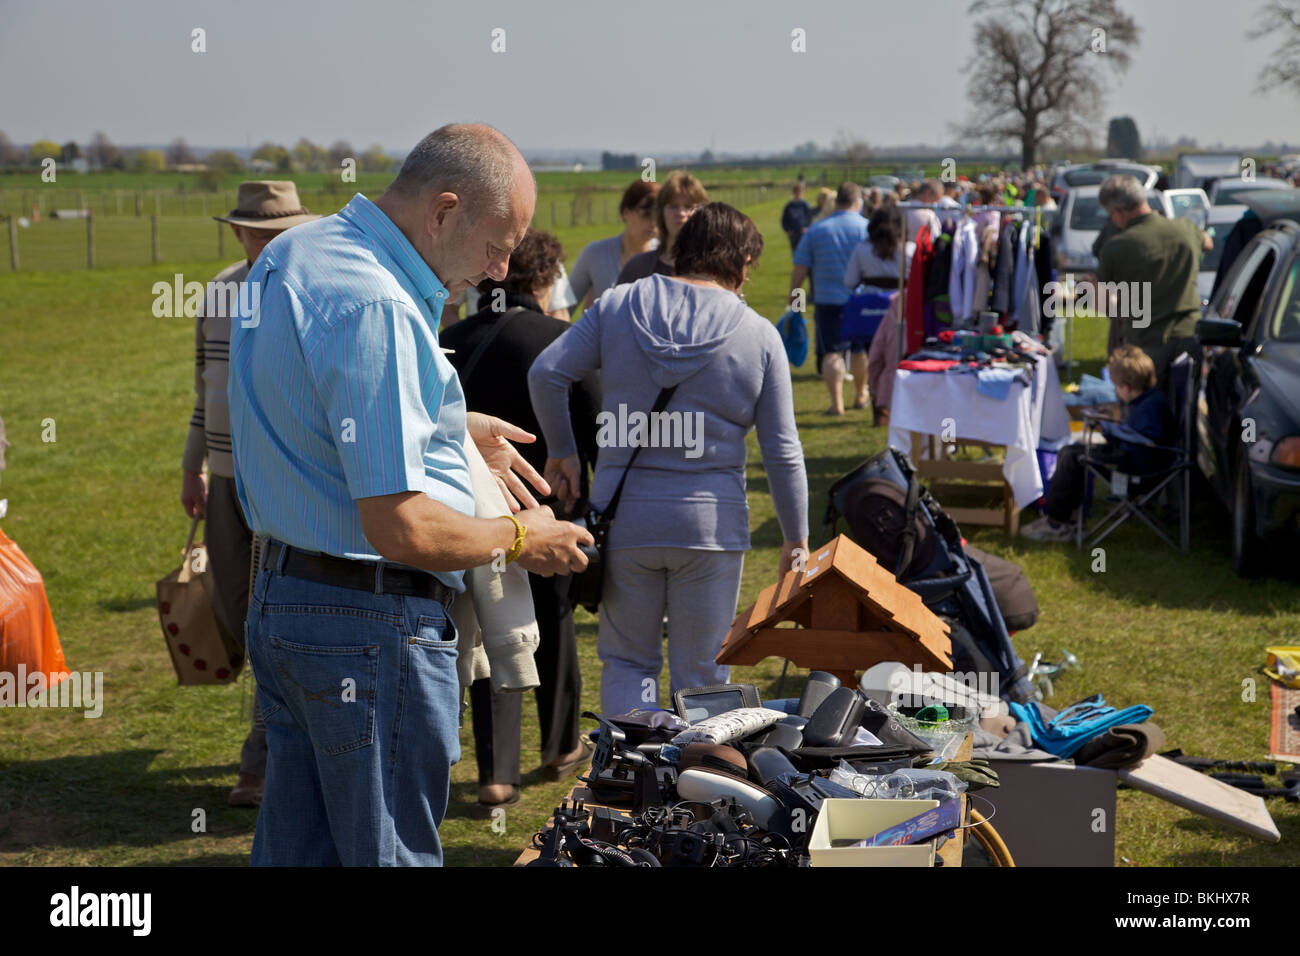 A car boot sale in England Stock Photo